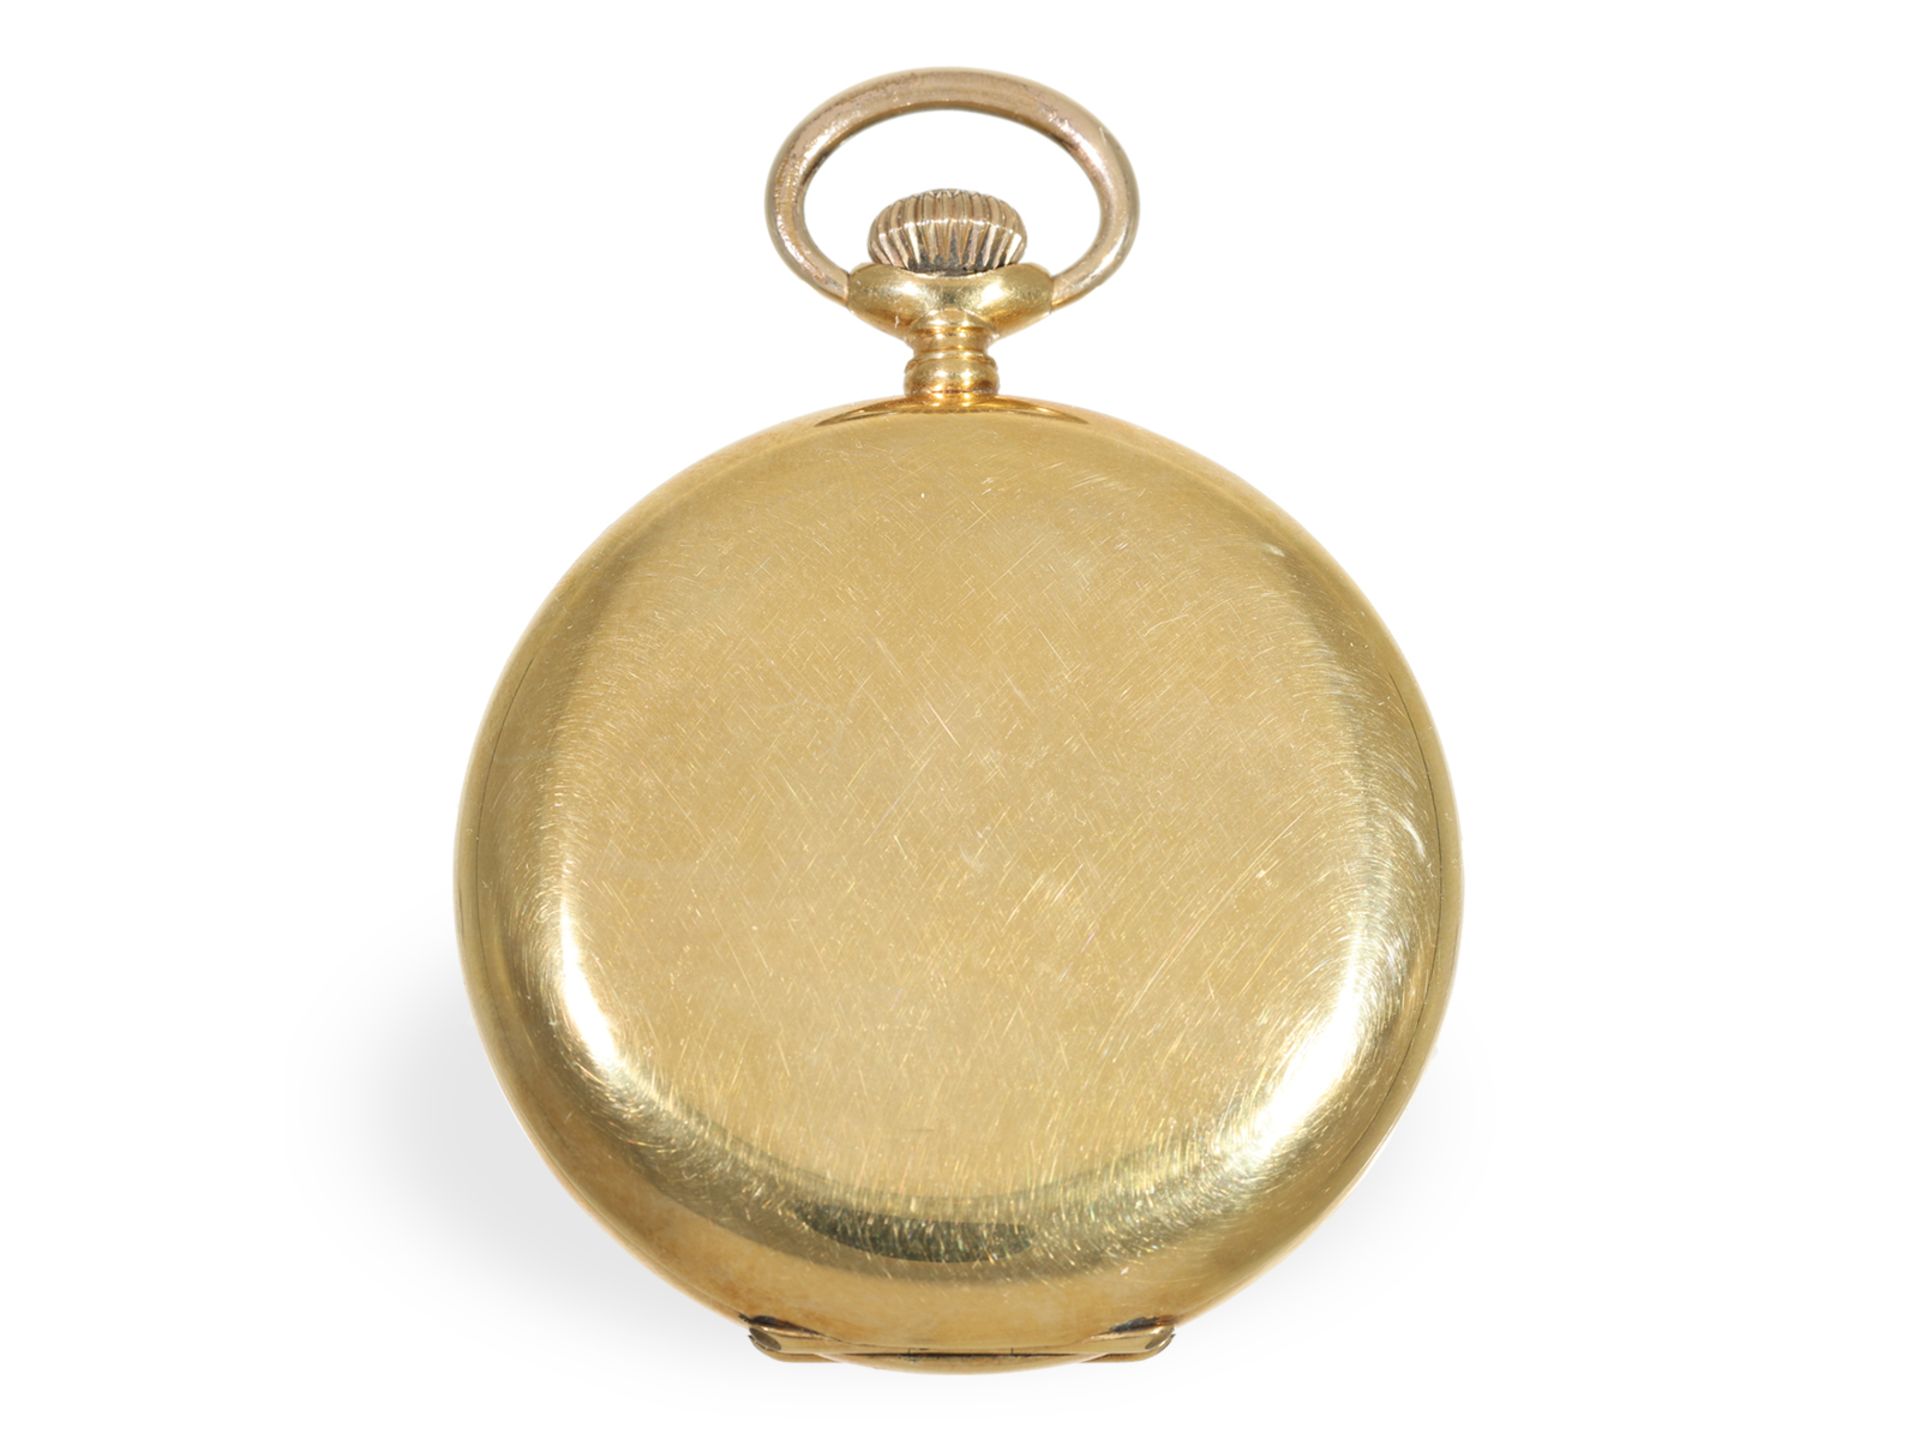 Pocket watch: fine gold hunting case watch with precision movement and gold watch chain, Record Watc - Image 7 of 8